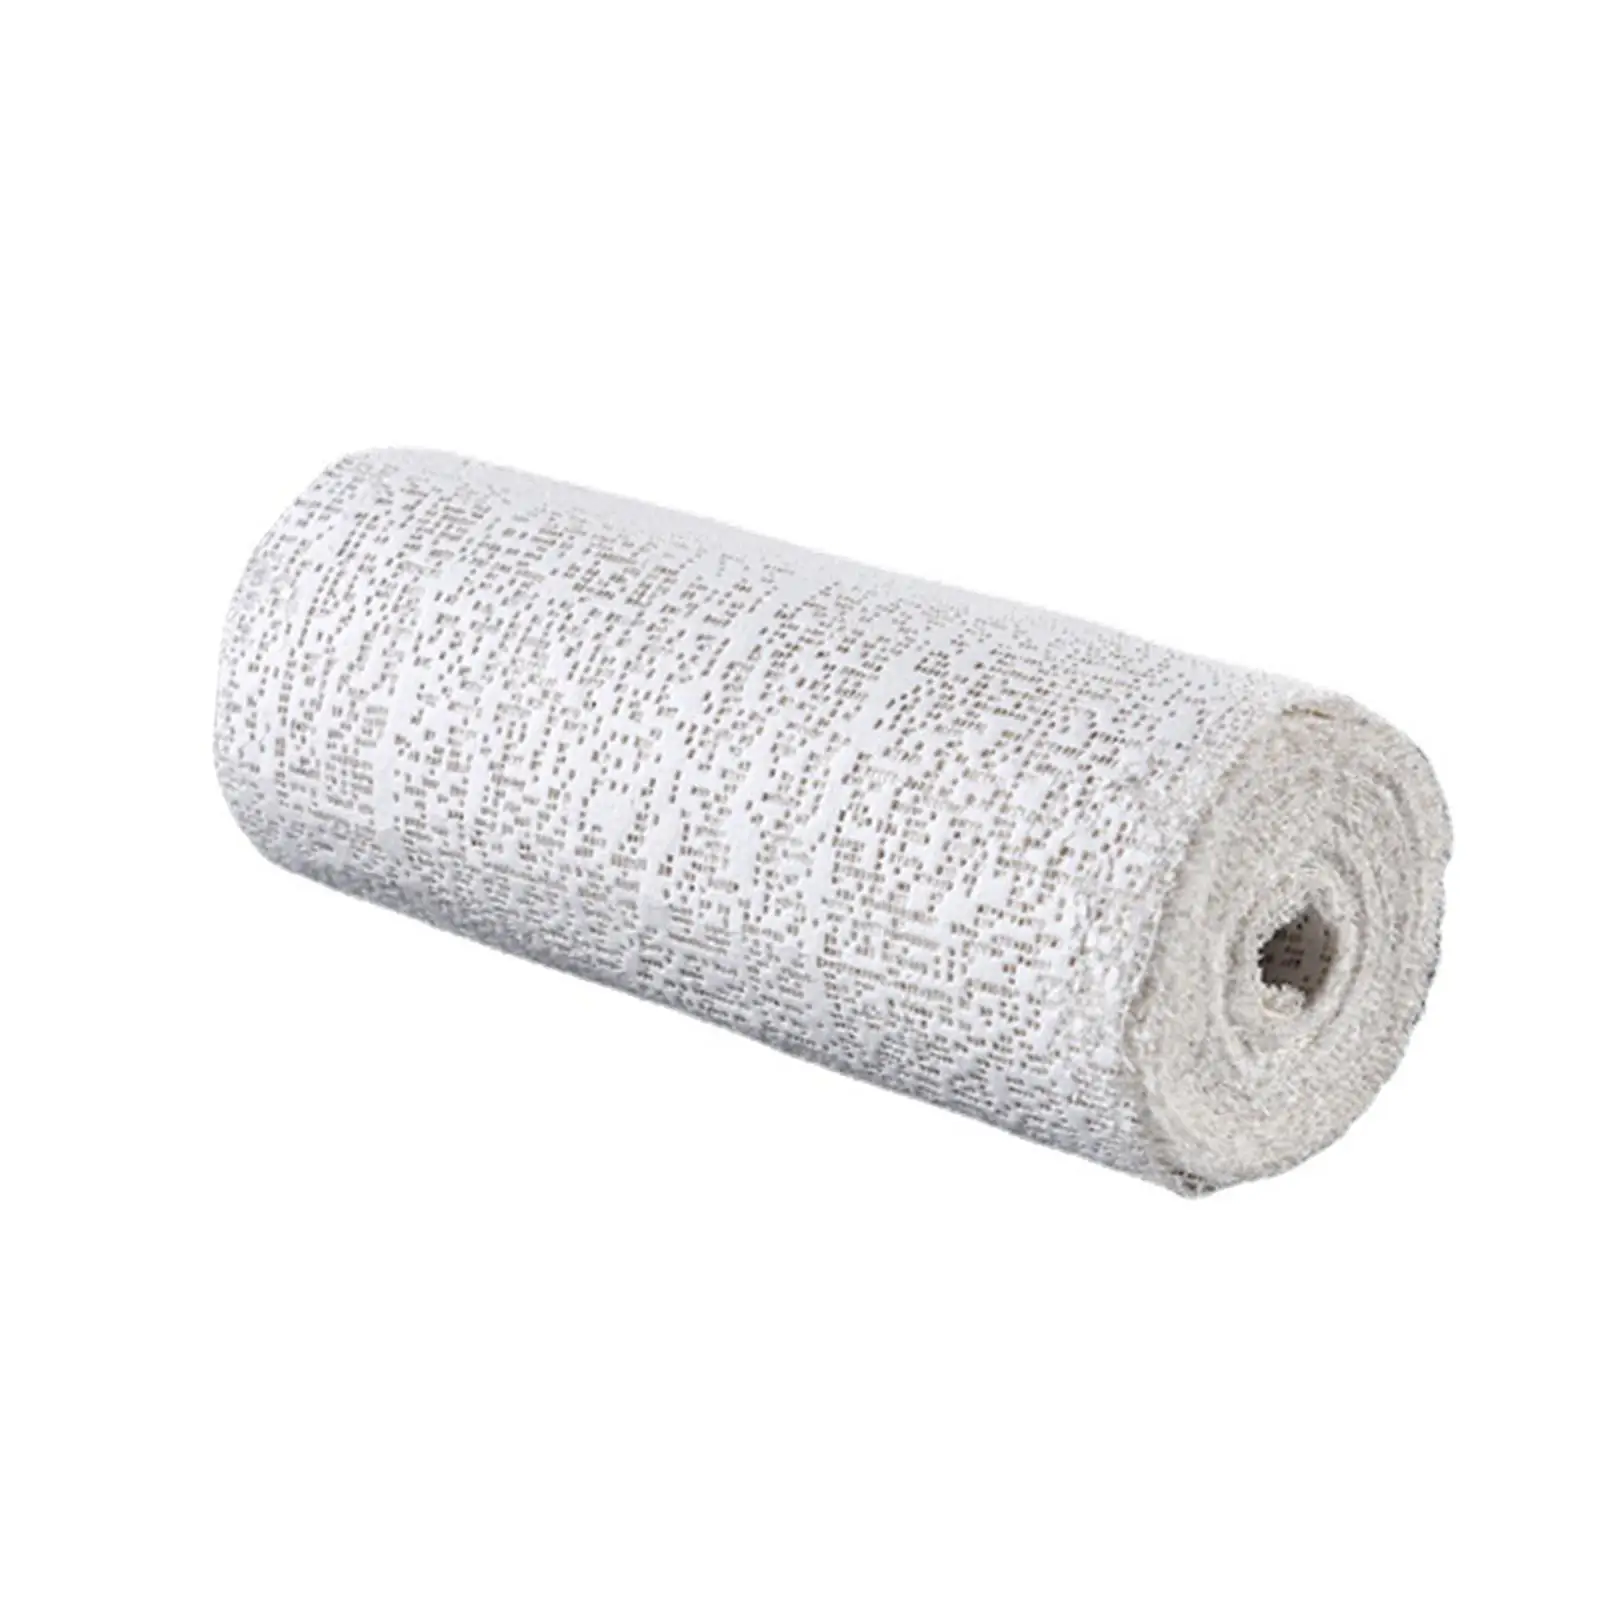 Plaster Cloth Gauze Bandages Strips Wrap Cast Material Tape for Crafting Cast Construction Sculpture Supplies Mask Making